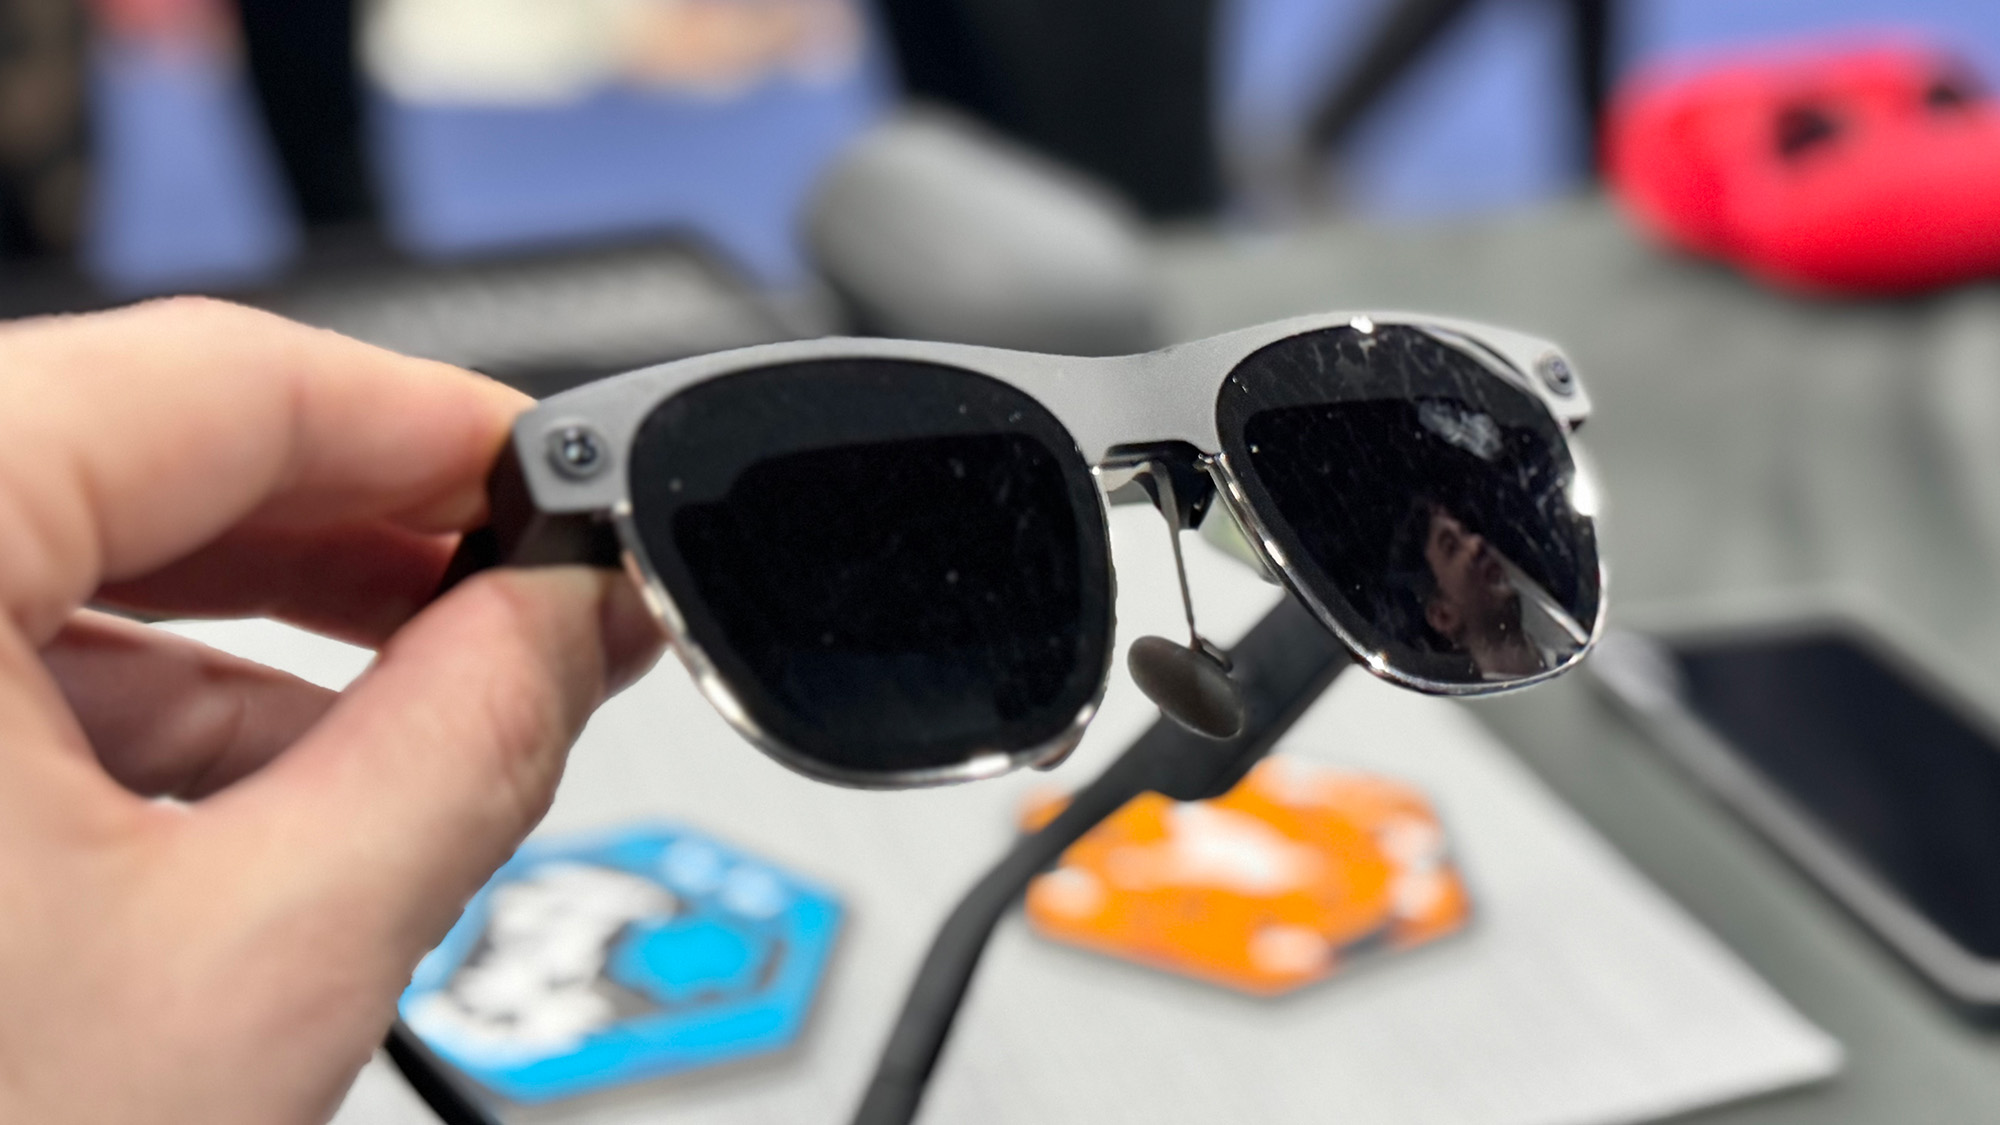 Smart glasses could arrive in 2022, but will still need a lot of work - CNET